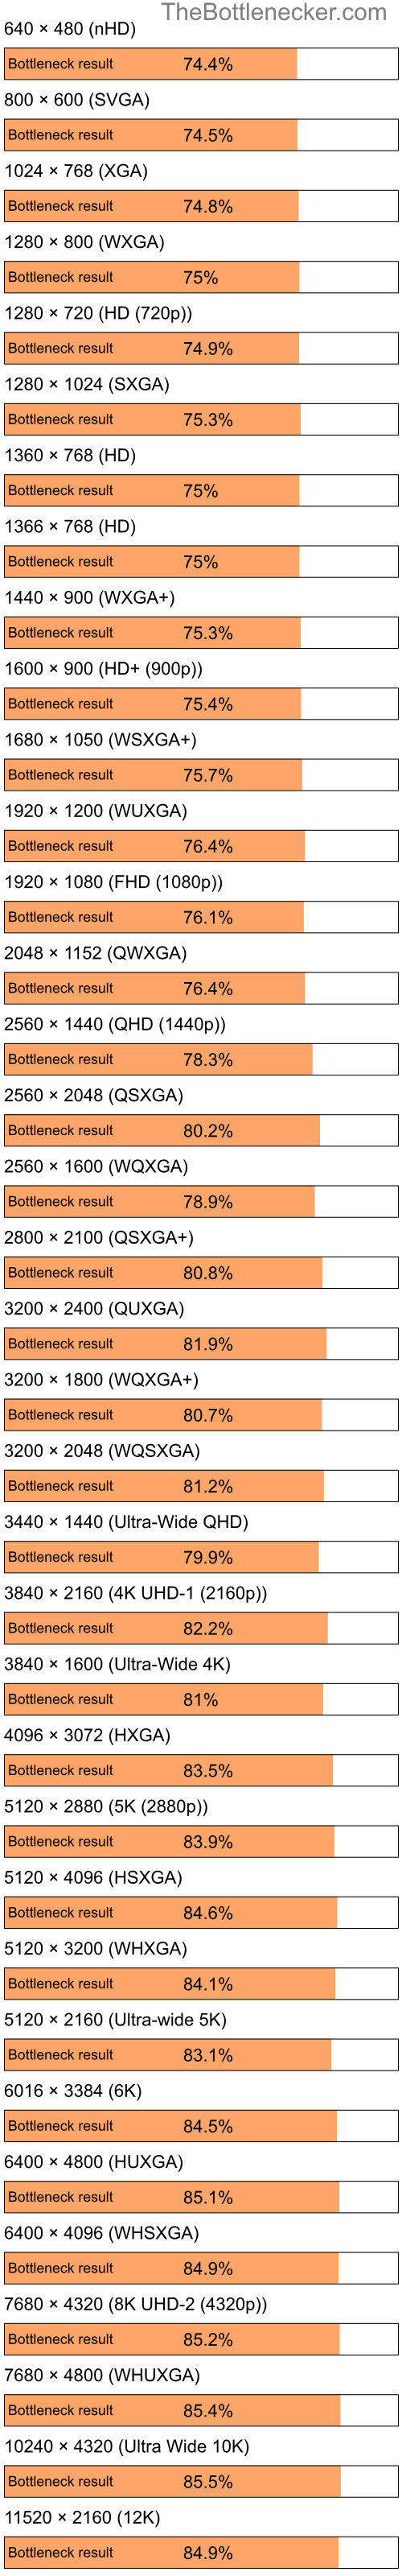 Bottleneck results by resolution for Intel Atom Z520 and AMD Mobility Radeon X700 in Graphic Card Intense Tasks